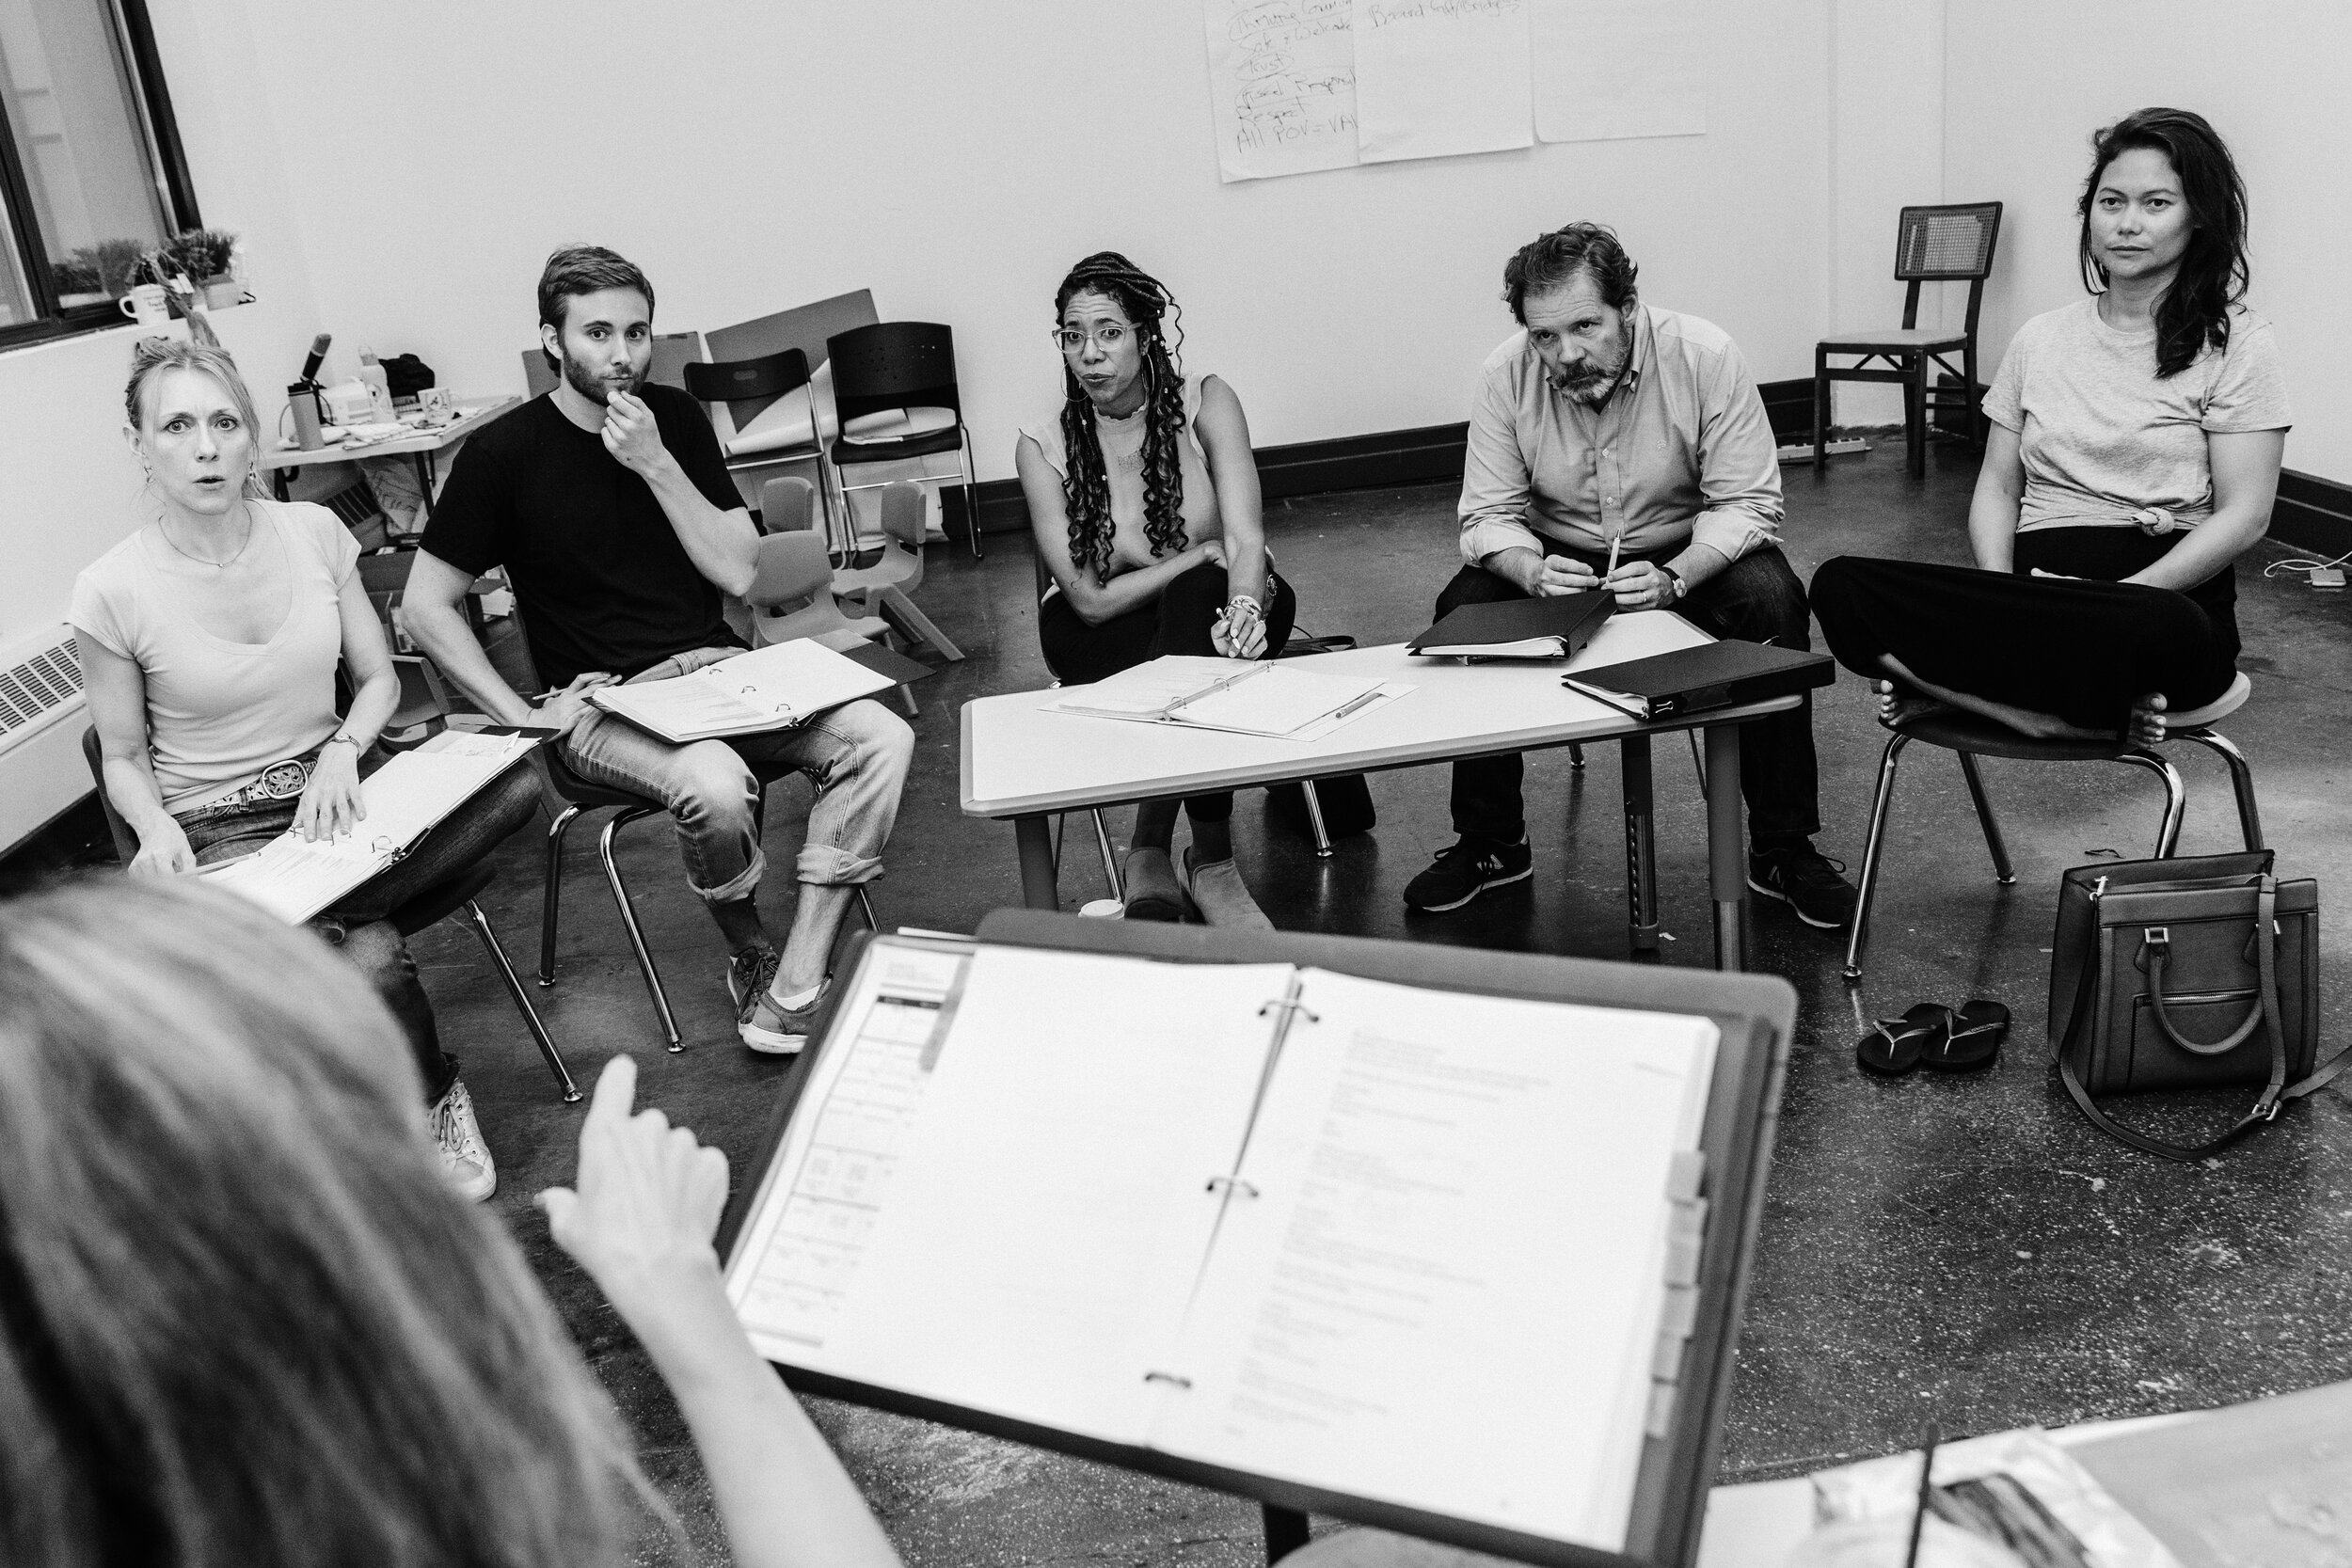  The cast of Eureka Day by Jonathan Spector rehearsing  https://www.nytimes.com/2019/08/25/theater/eureka-day-play-vaccinations.html 